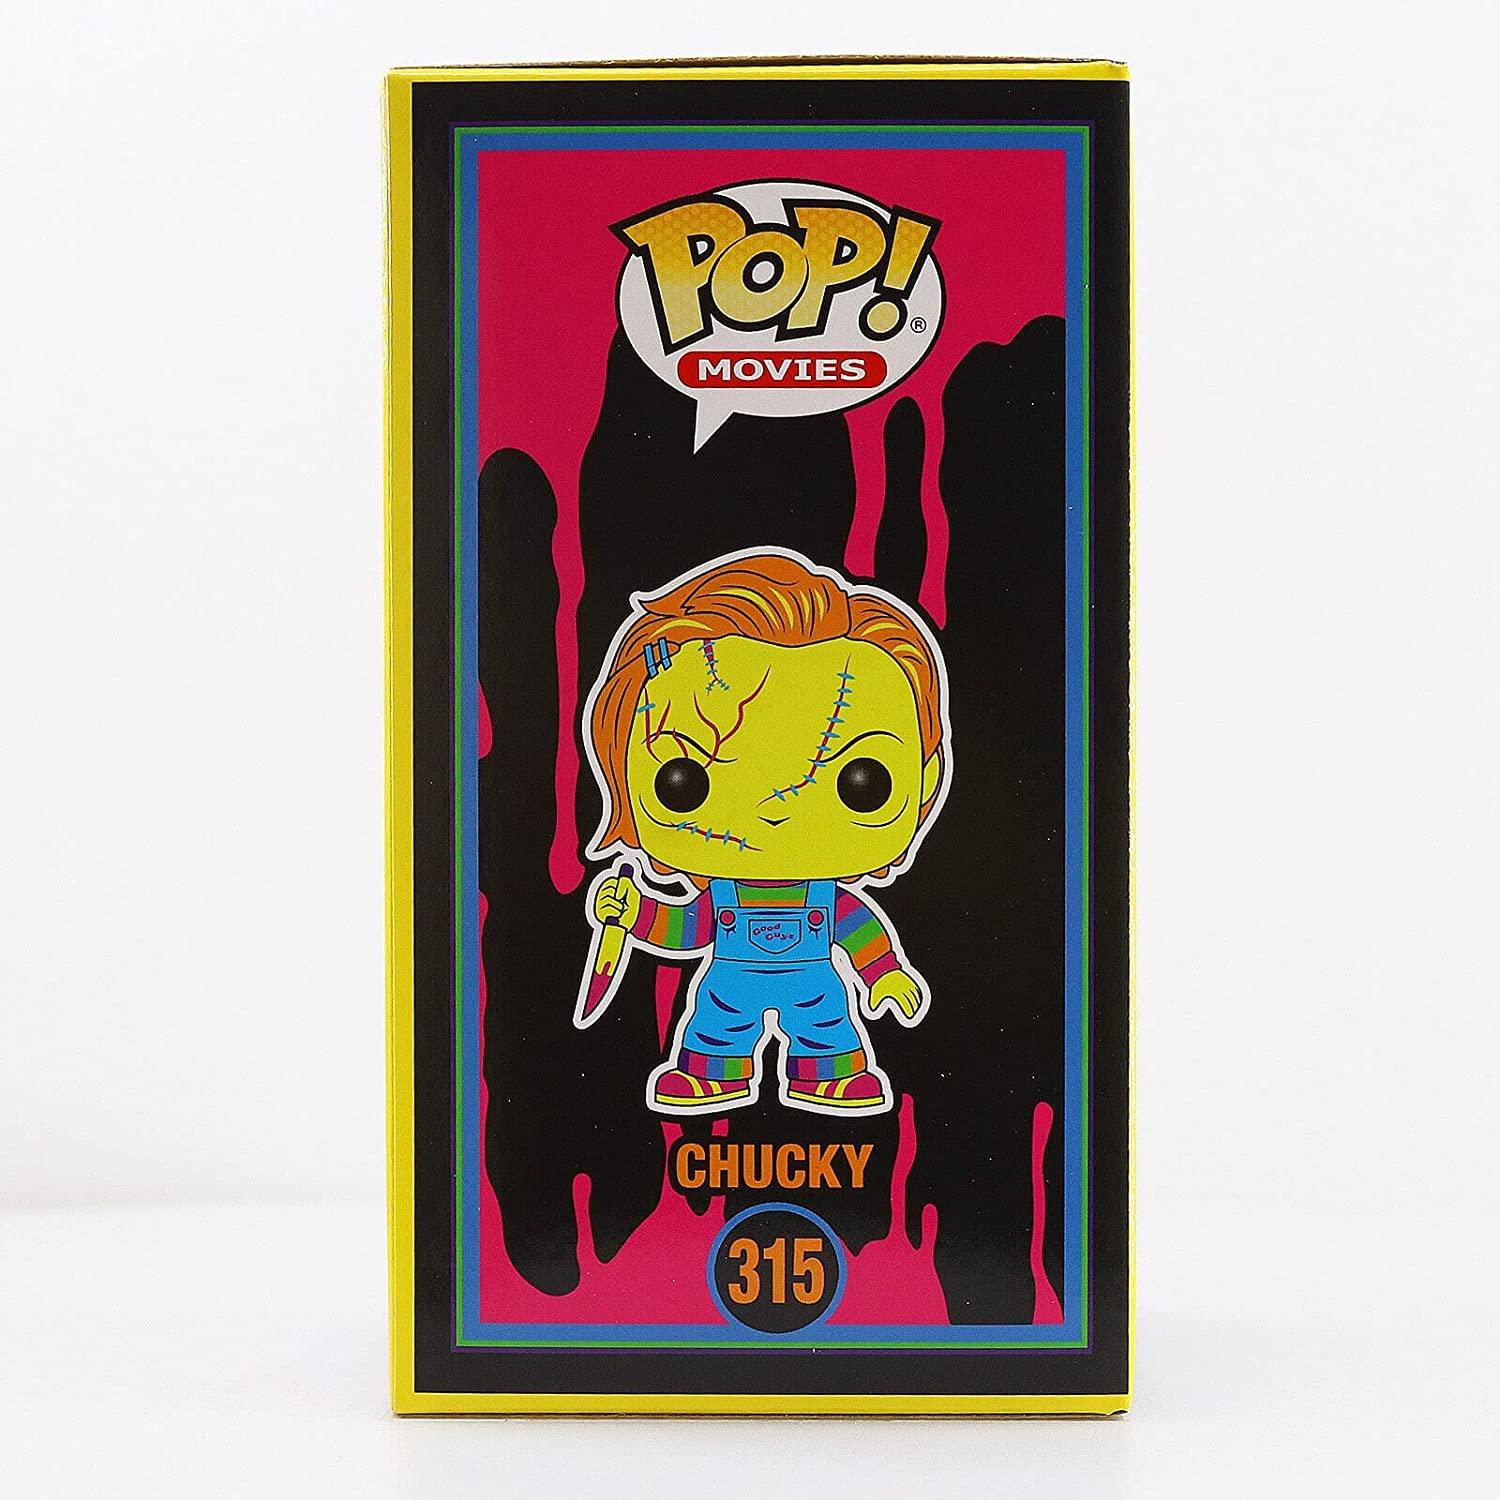 Funko Pop Bride of Chucky Black Light Entertainment Earth Exclusive Edition 315 - BumbleToys - 18+, Action Figures, Boys, Characters, Funko, Pre-Order